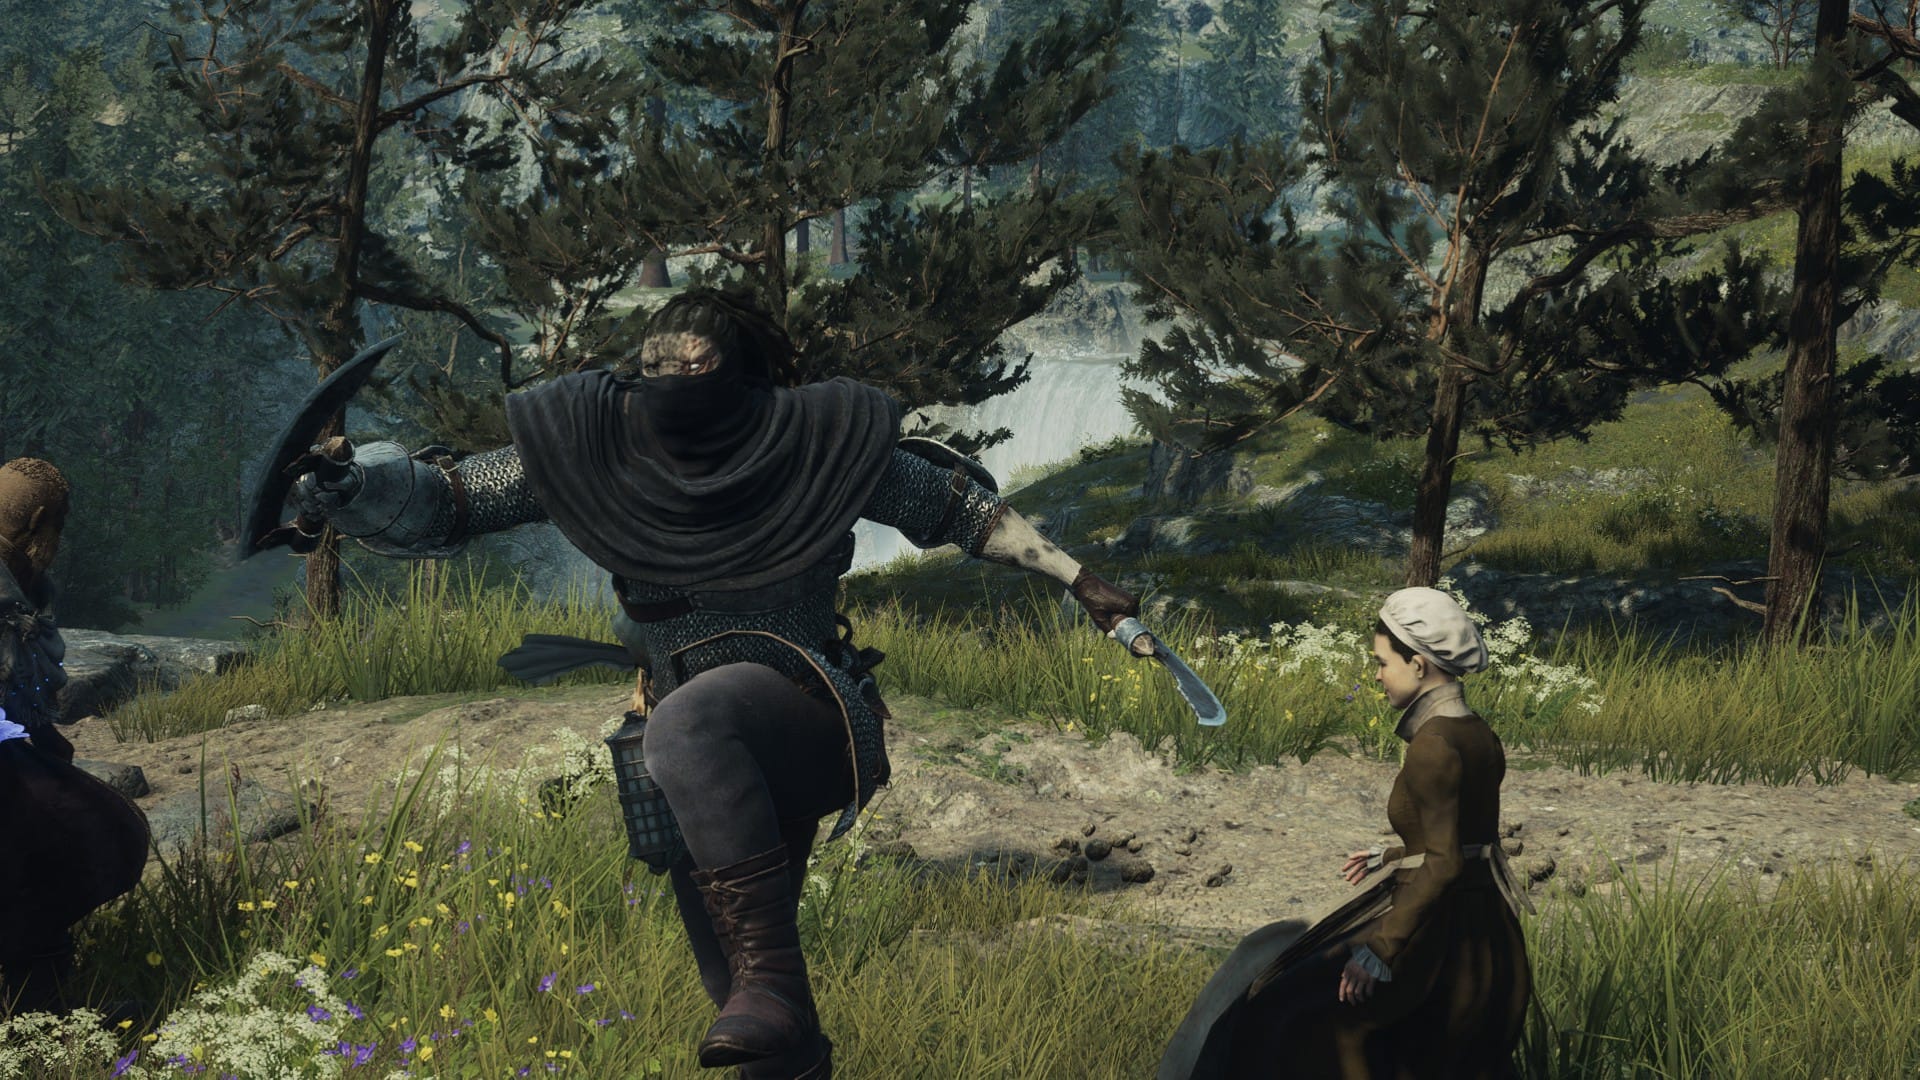 A masked warrior vaults toward the camera past a kneeling peasant in a forest.